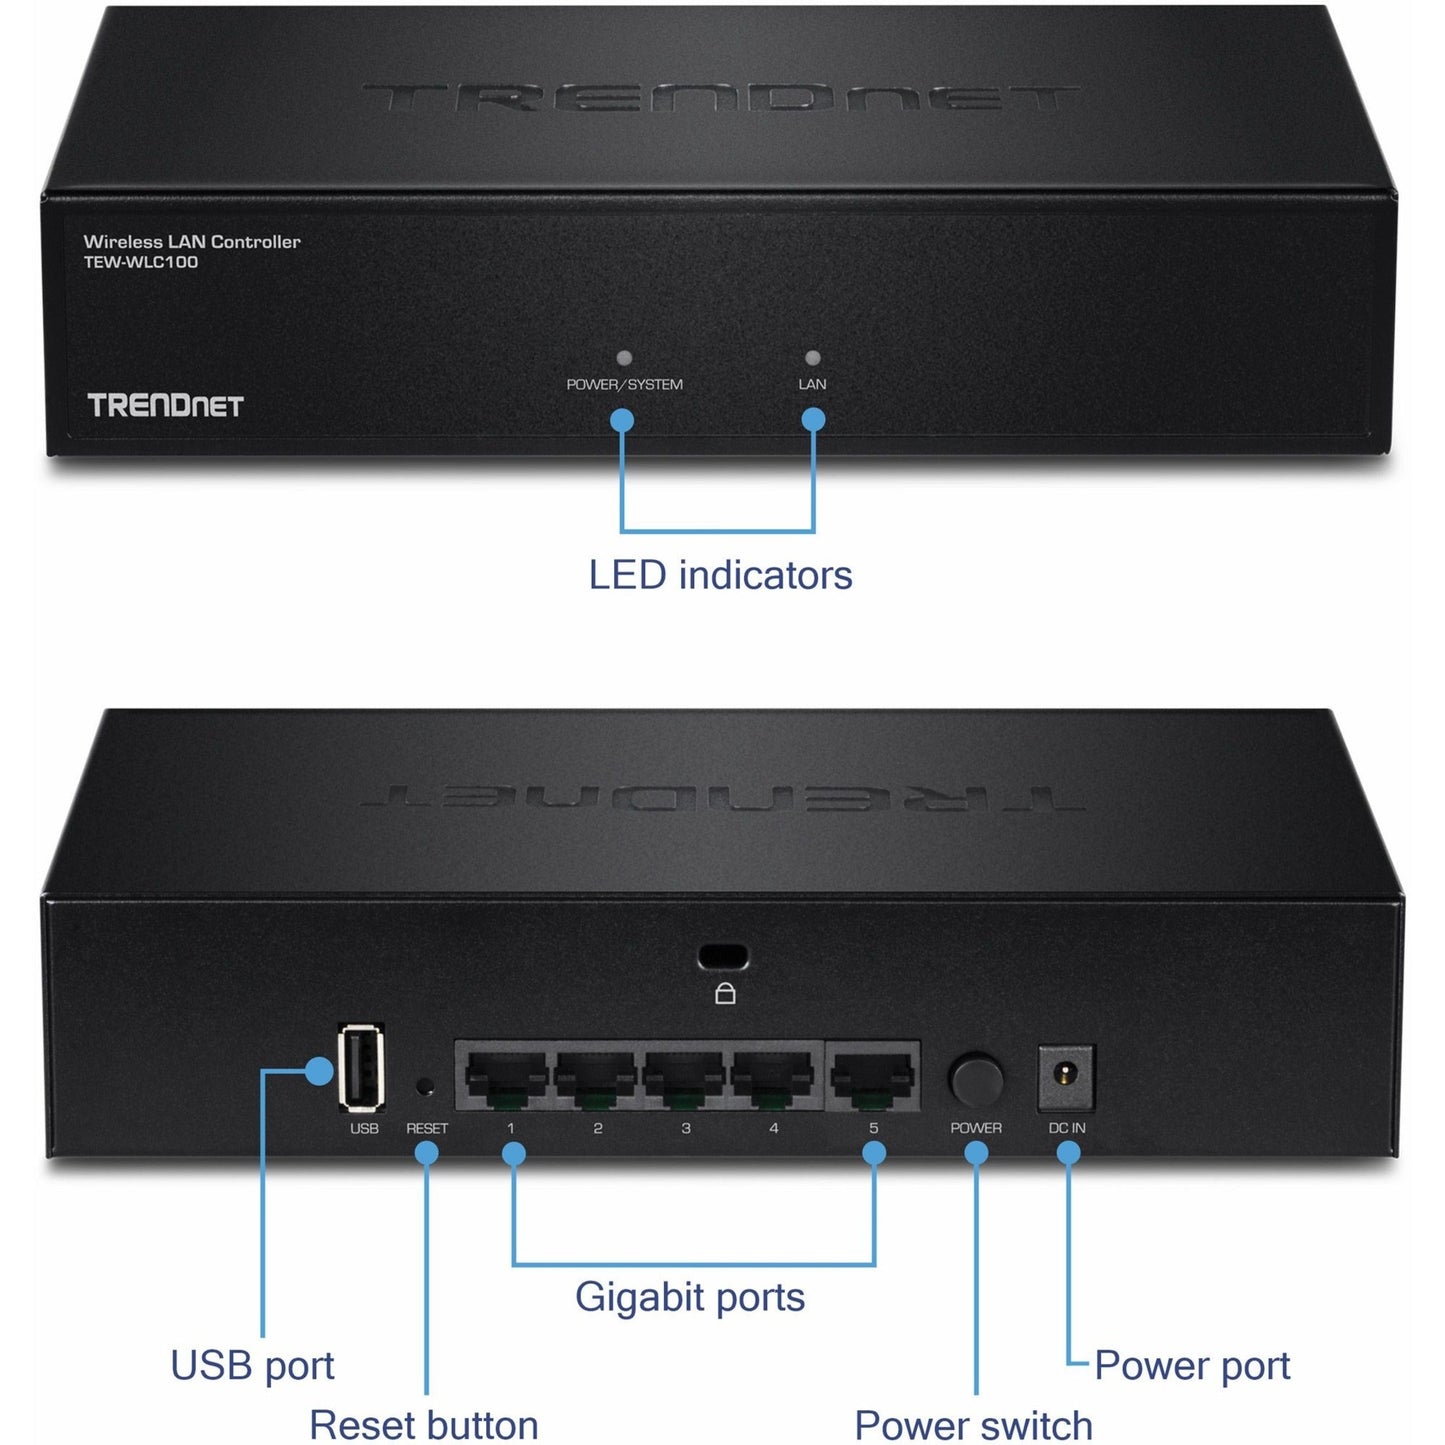 TRENDnet Wireless LAN Controller; Built-in 5-Port GB Switch; Compatible with: TEW-755AP/TEW-821DAP/TEW-825DAP; Access Point Management; TEW-WLC100